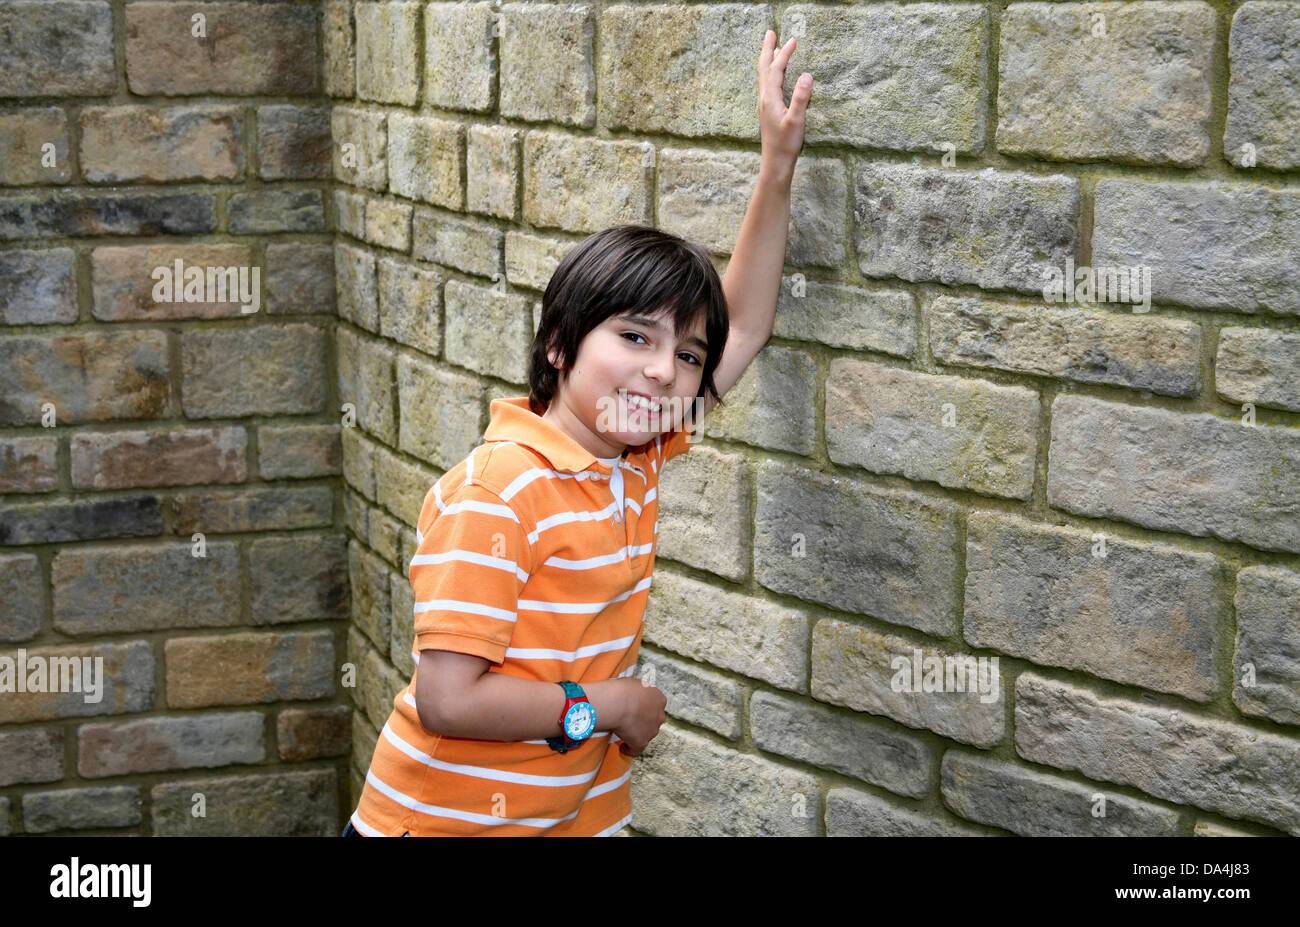 Portrait of smiling brunette boy leaning on stone wall with arms raised Stock Photo